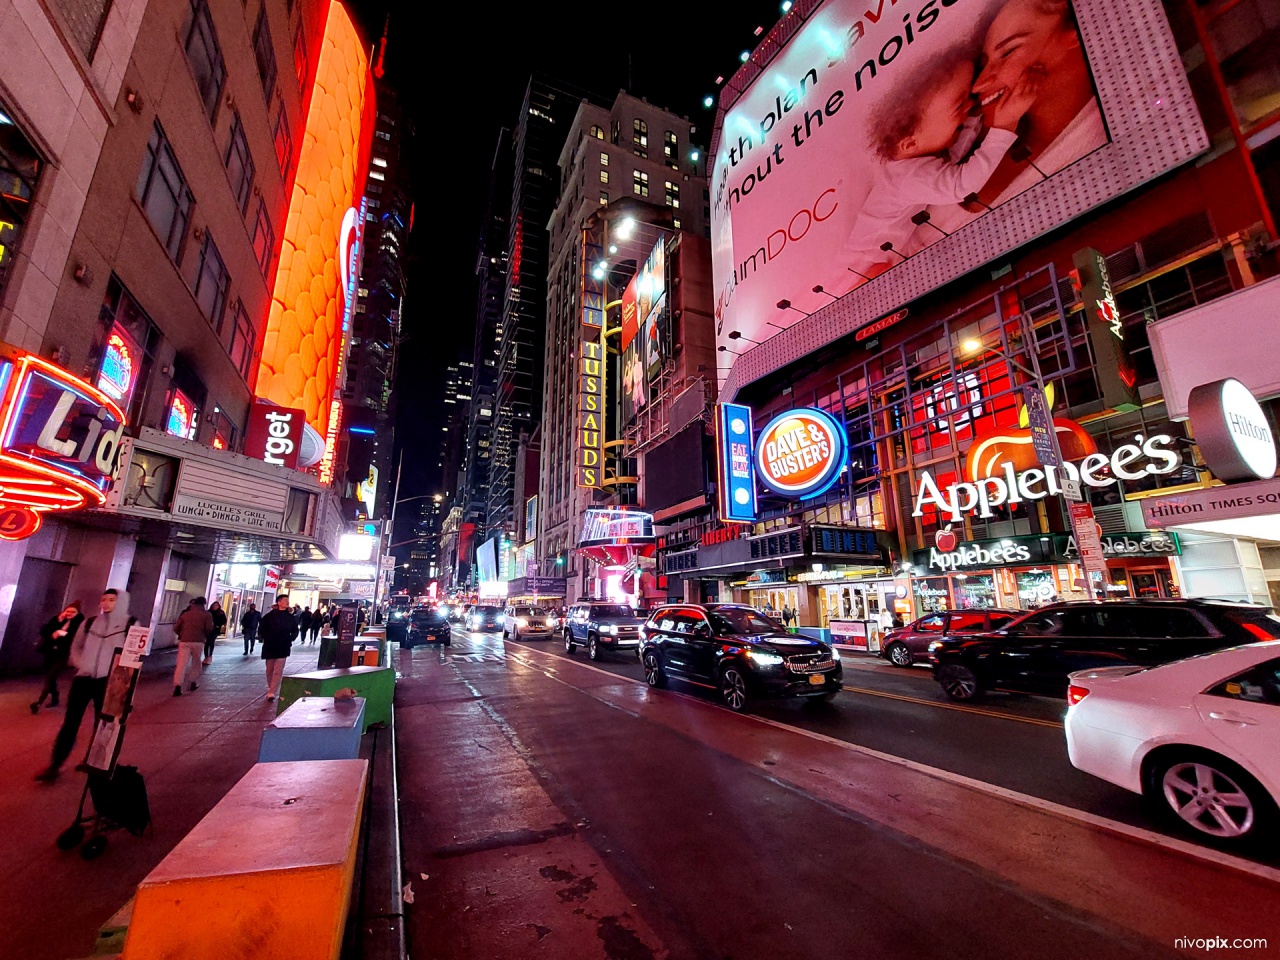 42nd street, Times Square